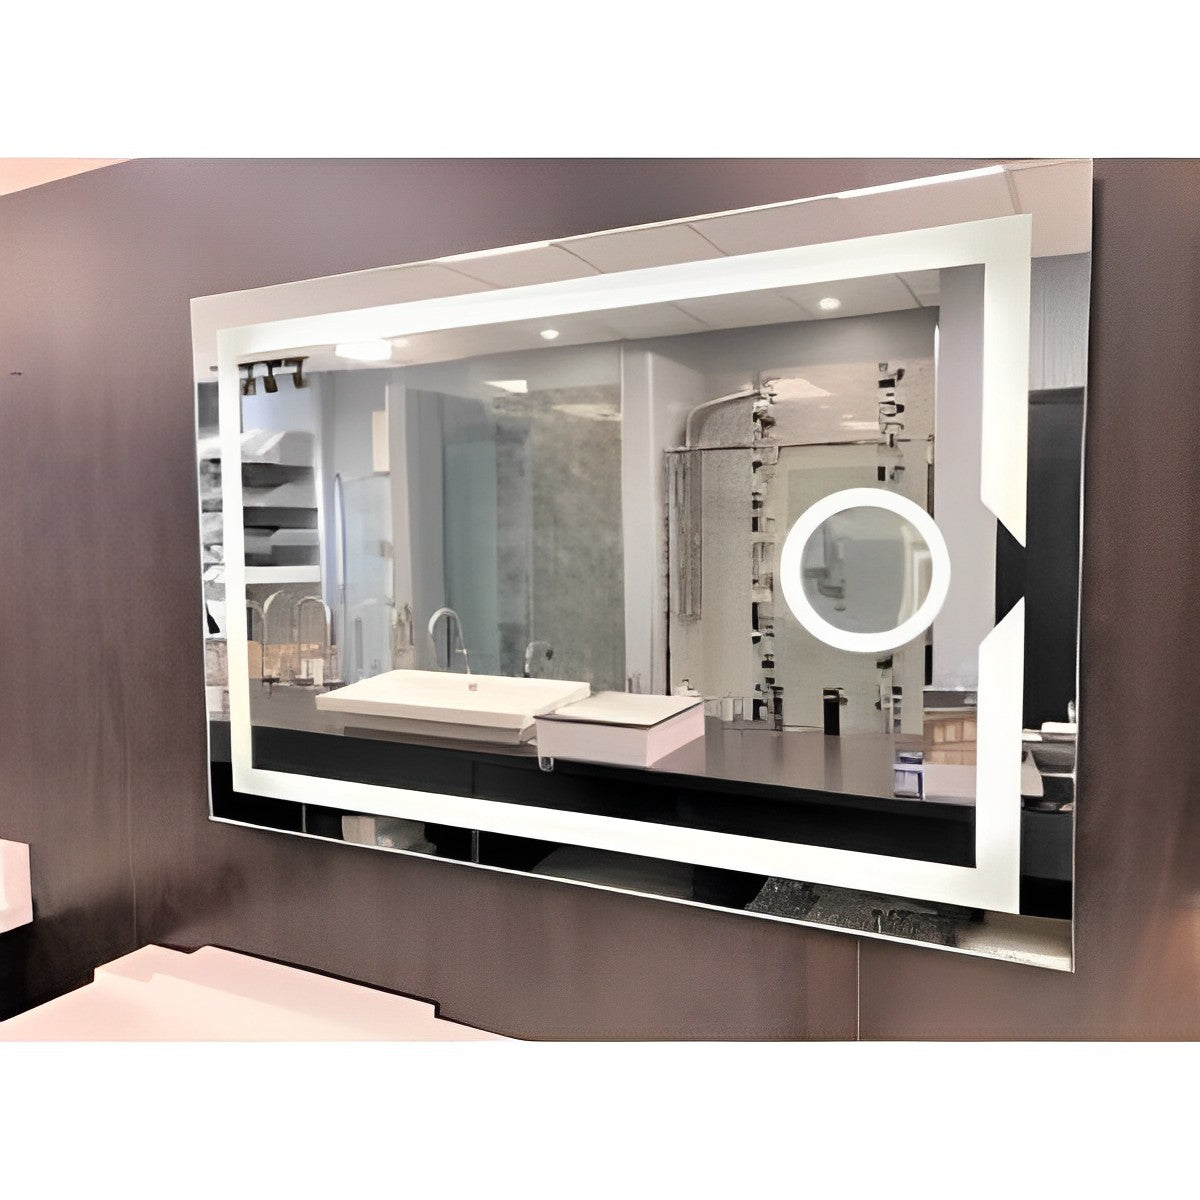 60" Horizontal Hanging Mirror with LED Light and Bluetooth MSL-815 - RenoShop